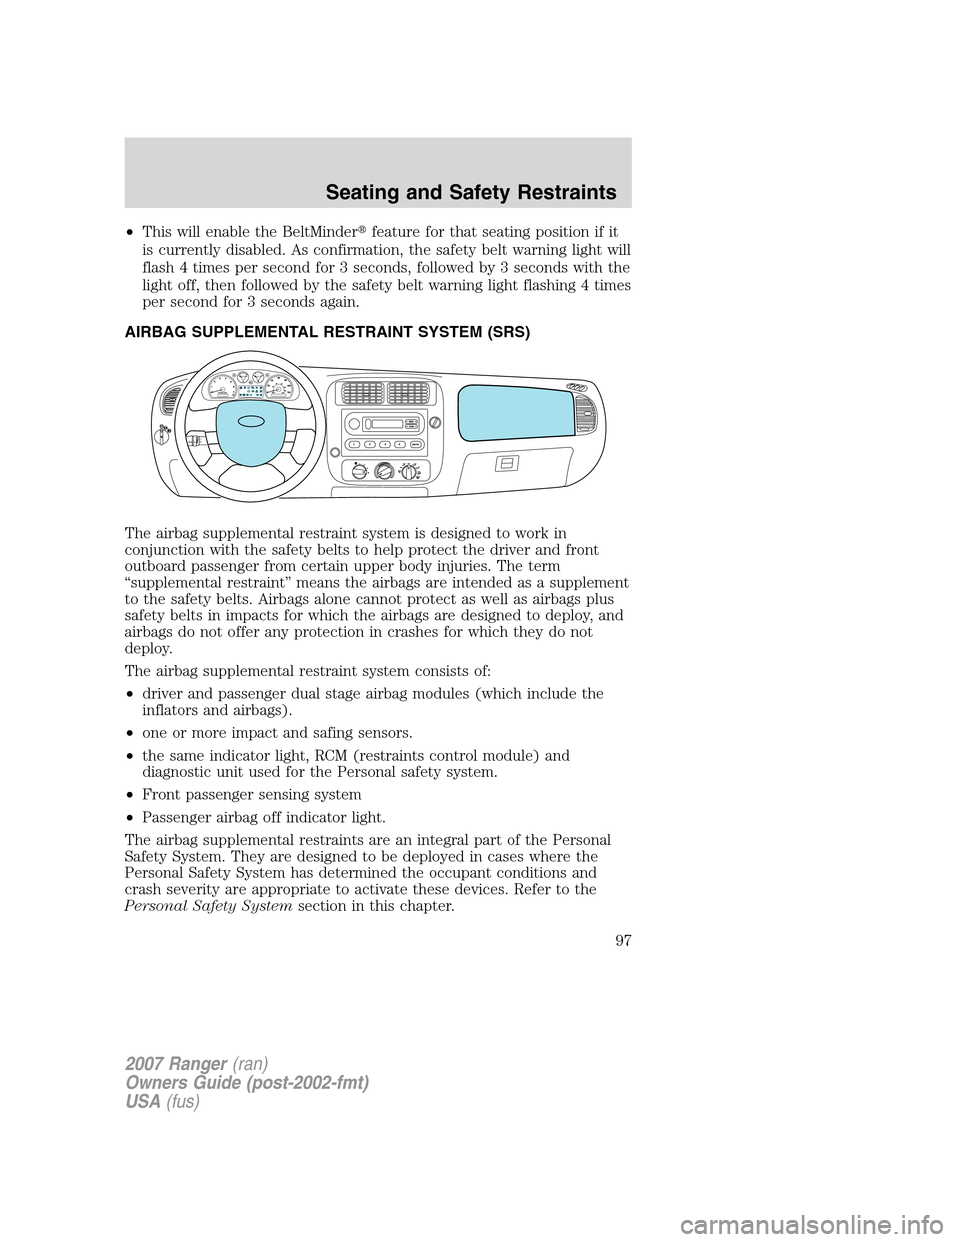 FORD RANGER 2007 2.G User Guide •This will enable the BeltMinderfeature for that seating position if it
is currently disabled. As confirmation, the safety belt warning light will
flash 4 times per second for 3 seconds, followed b